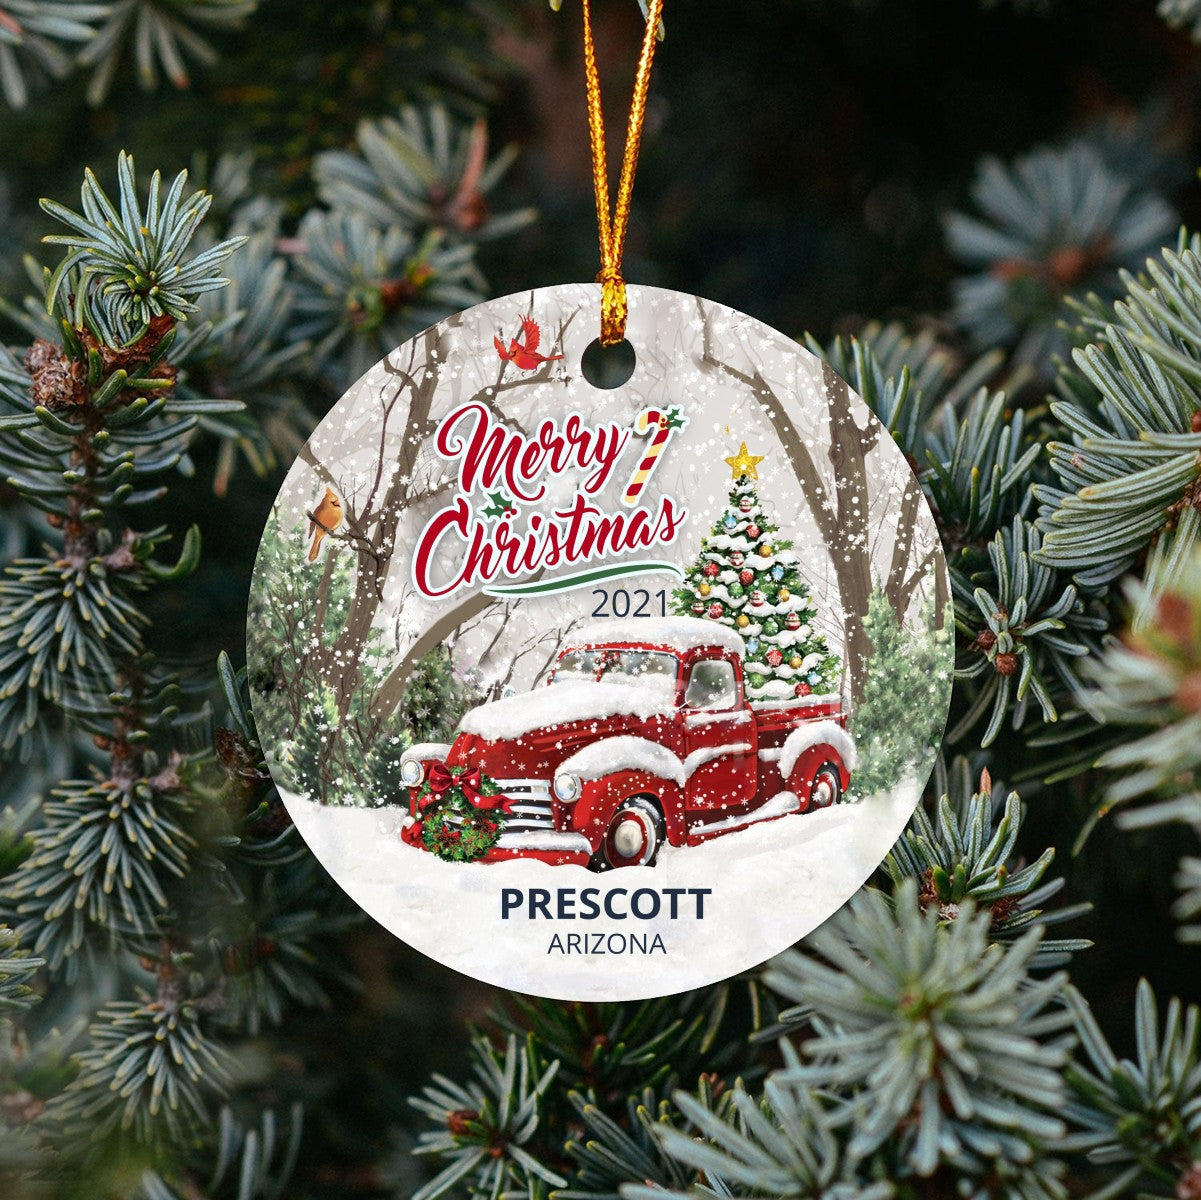 Christmas Tree Ornaments Prescott - Ornament Customize With Name City And State Prescott Arizona AZ - Red Truck Xmas Ornaments 3'' Plastic Gift For Family, Friend And Housewarming